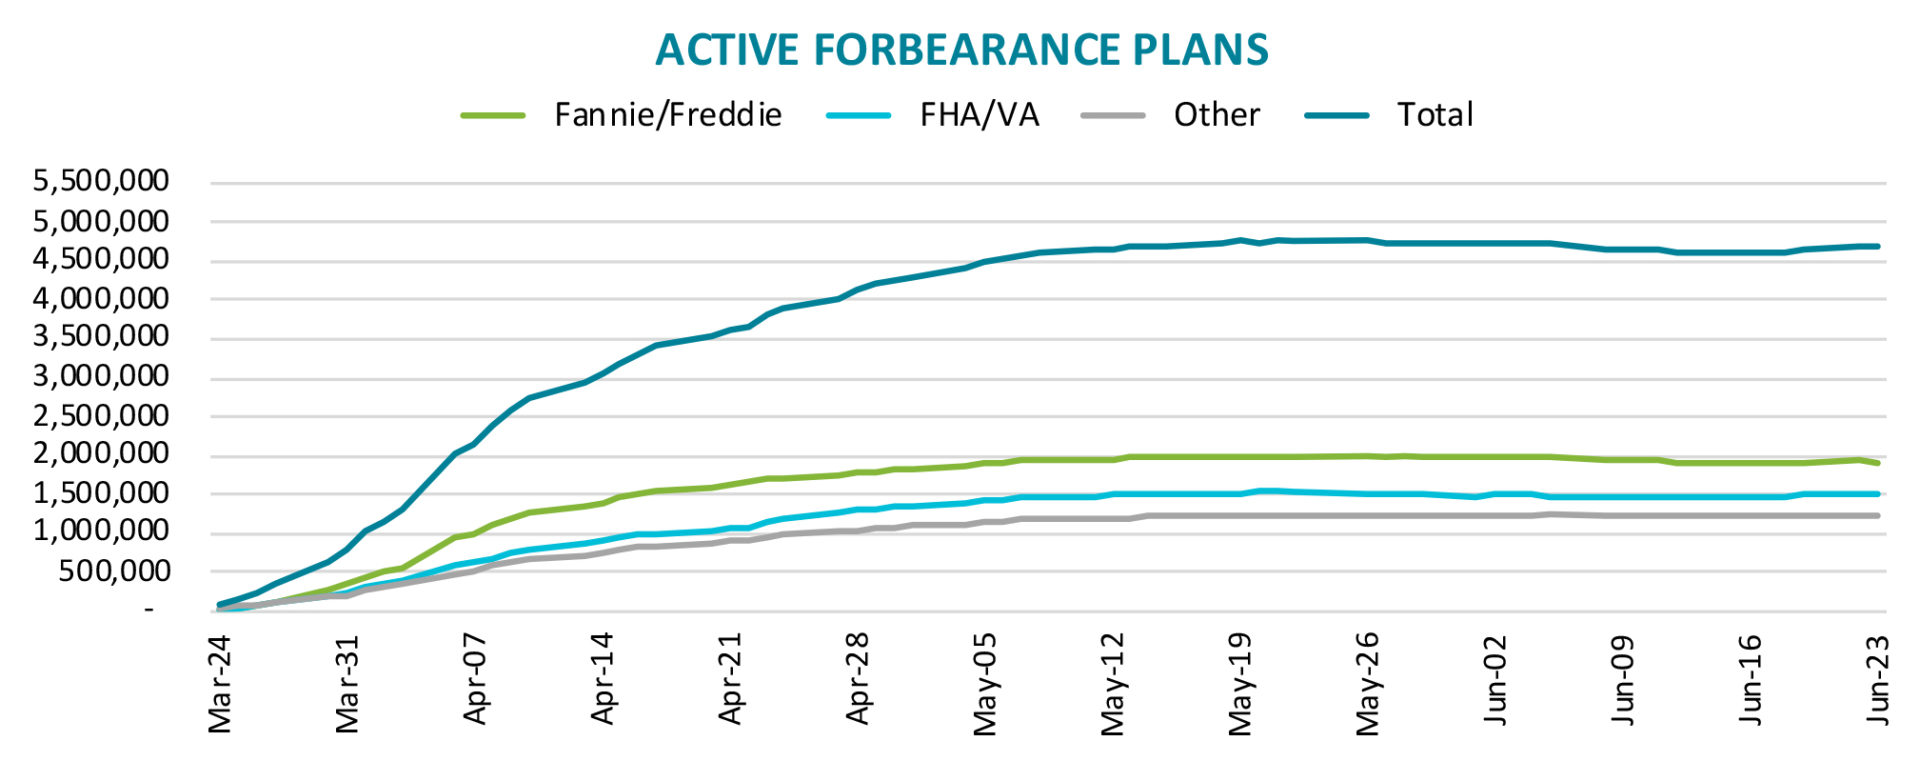 According to the latest McDash Flash Forbearance Tracker from Black Knight, the number of homeowners in active forbearance rose this week after three consecutive weeks of declines